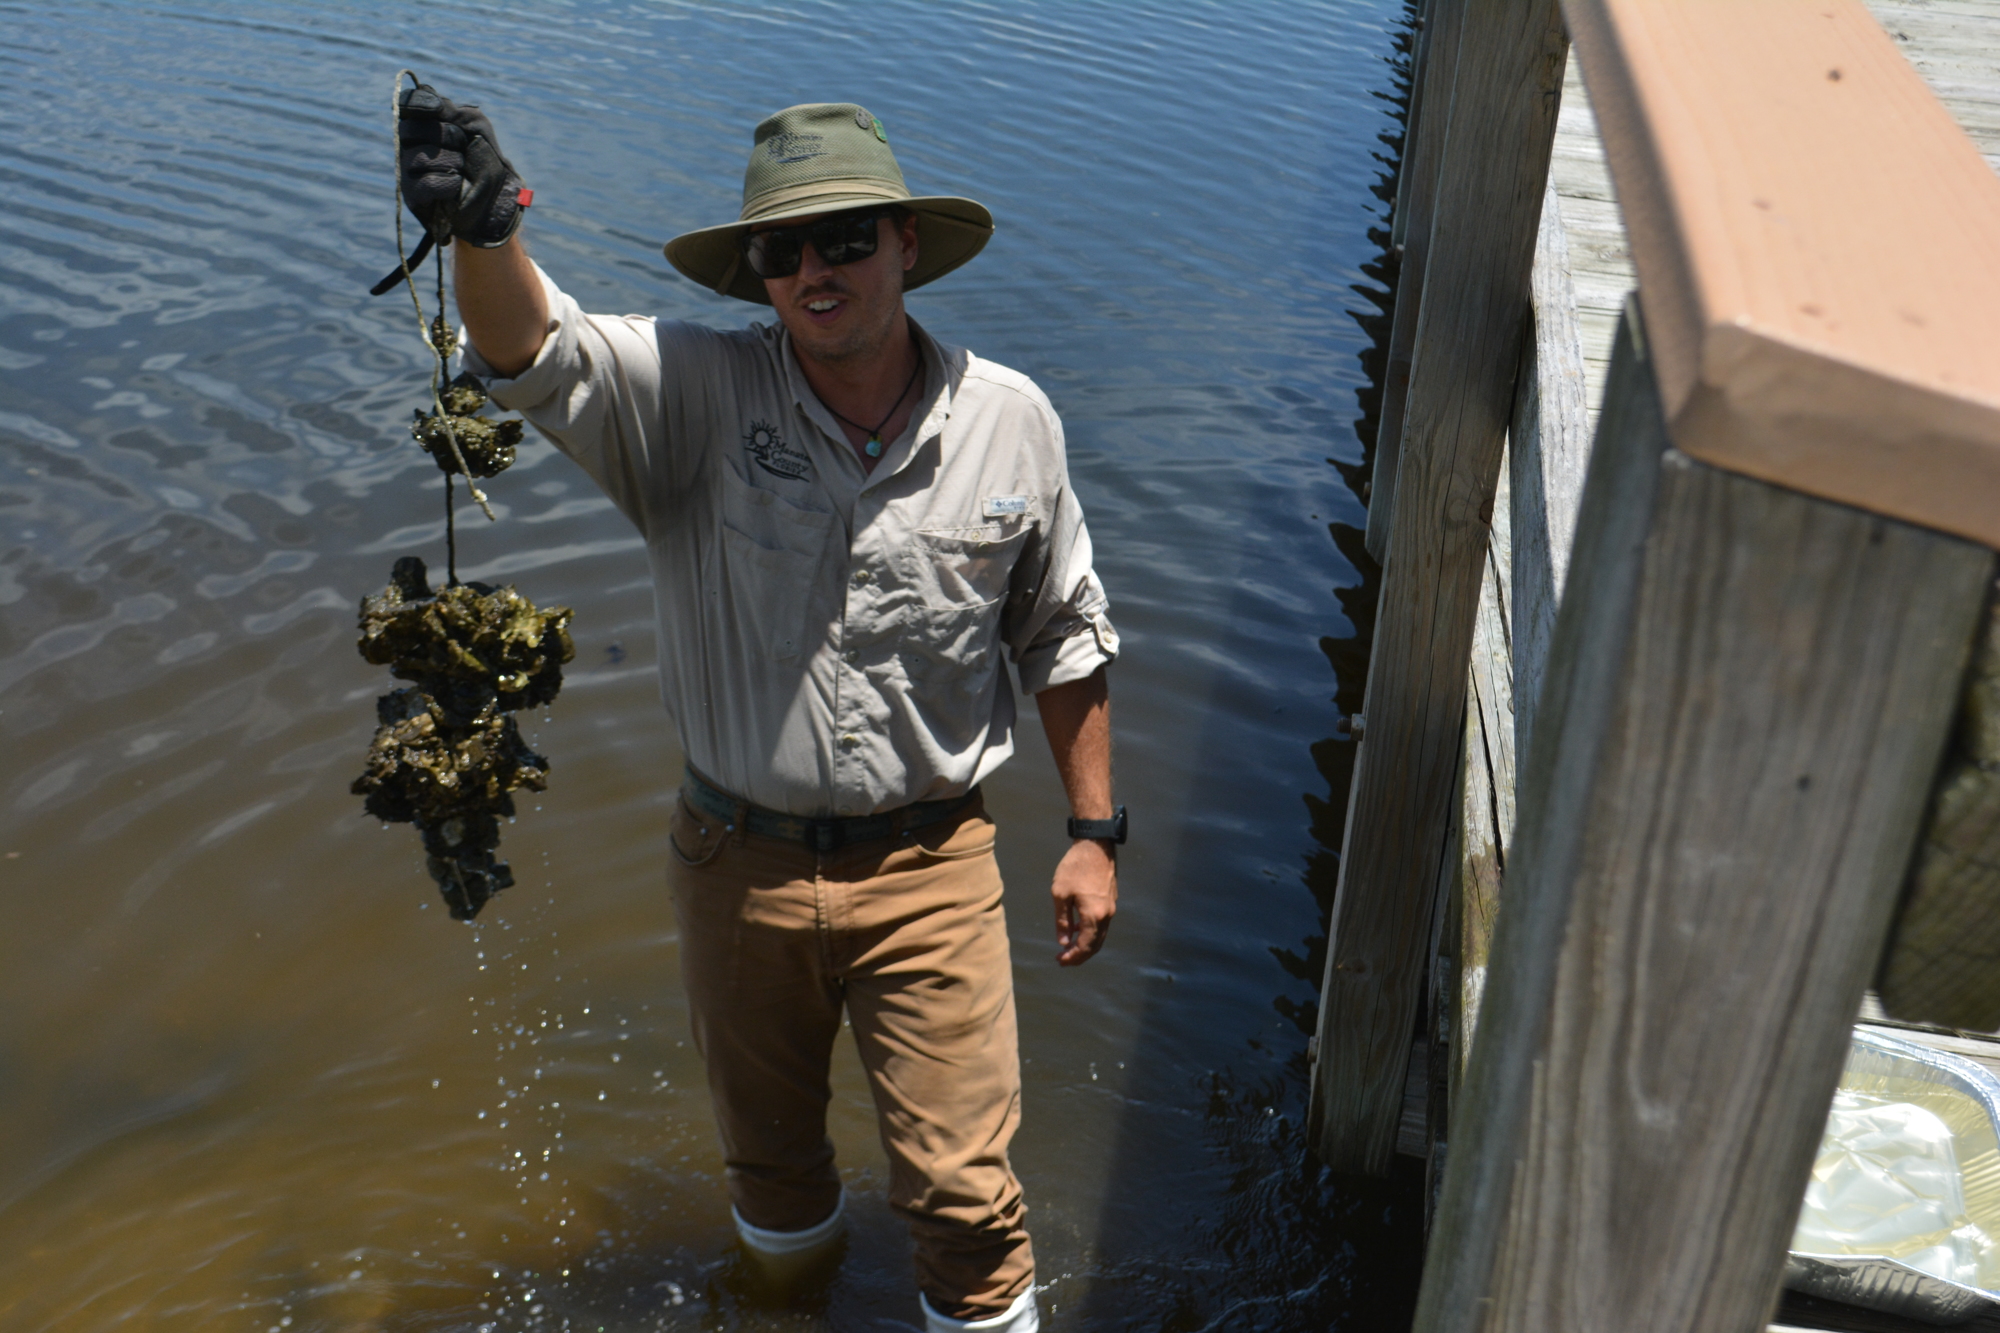 Shaun Swartz, environmental specialist, holds up a vertical oyster garden that has been under a dock at Robinson Preserve for about a year. (Photo by Lauren Tronstad)